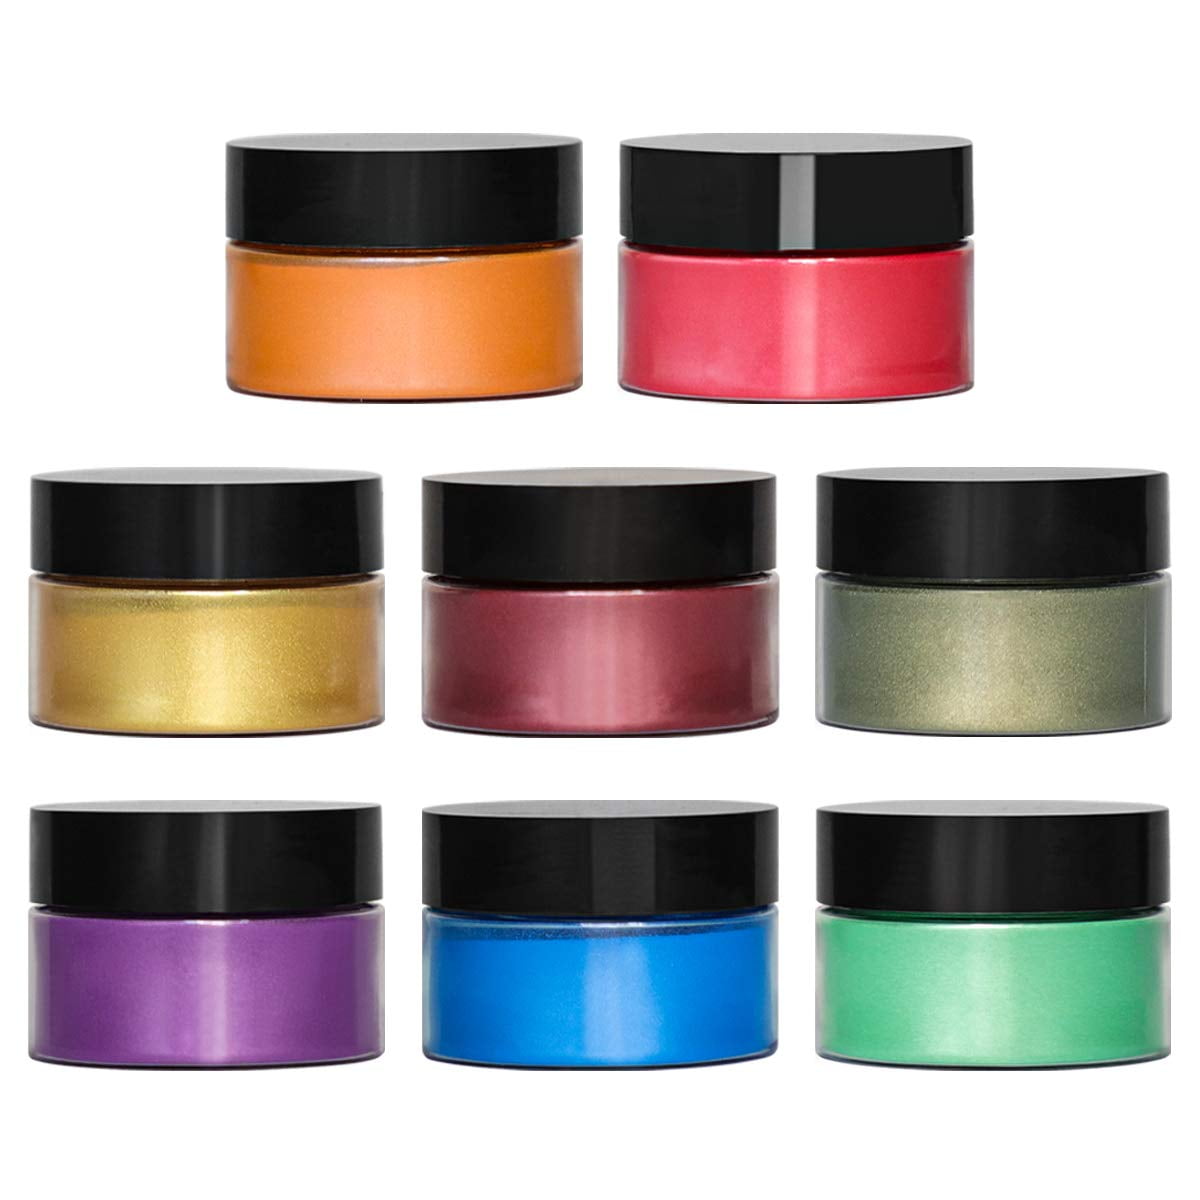 Metallic Pigment Powder - 24 Color Epoxy Resin Pigment Fine Powder for  Resin Artwork, Painting - Shimmer Metal Color Dye Mica Powder for Slime,  Soap